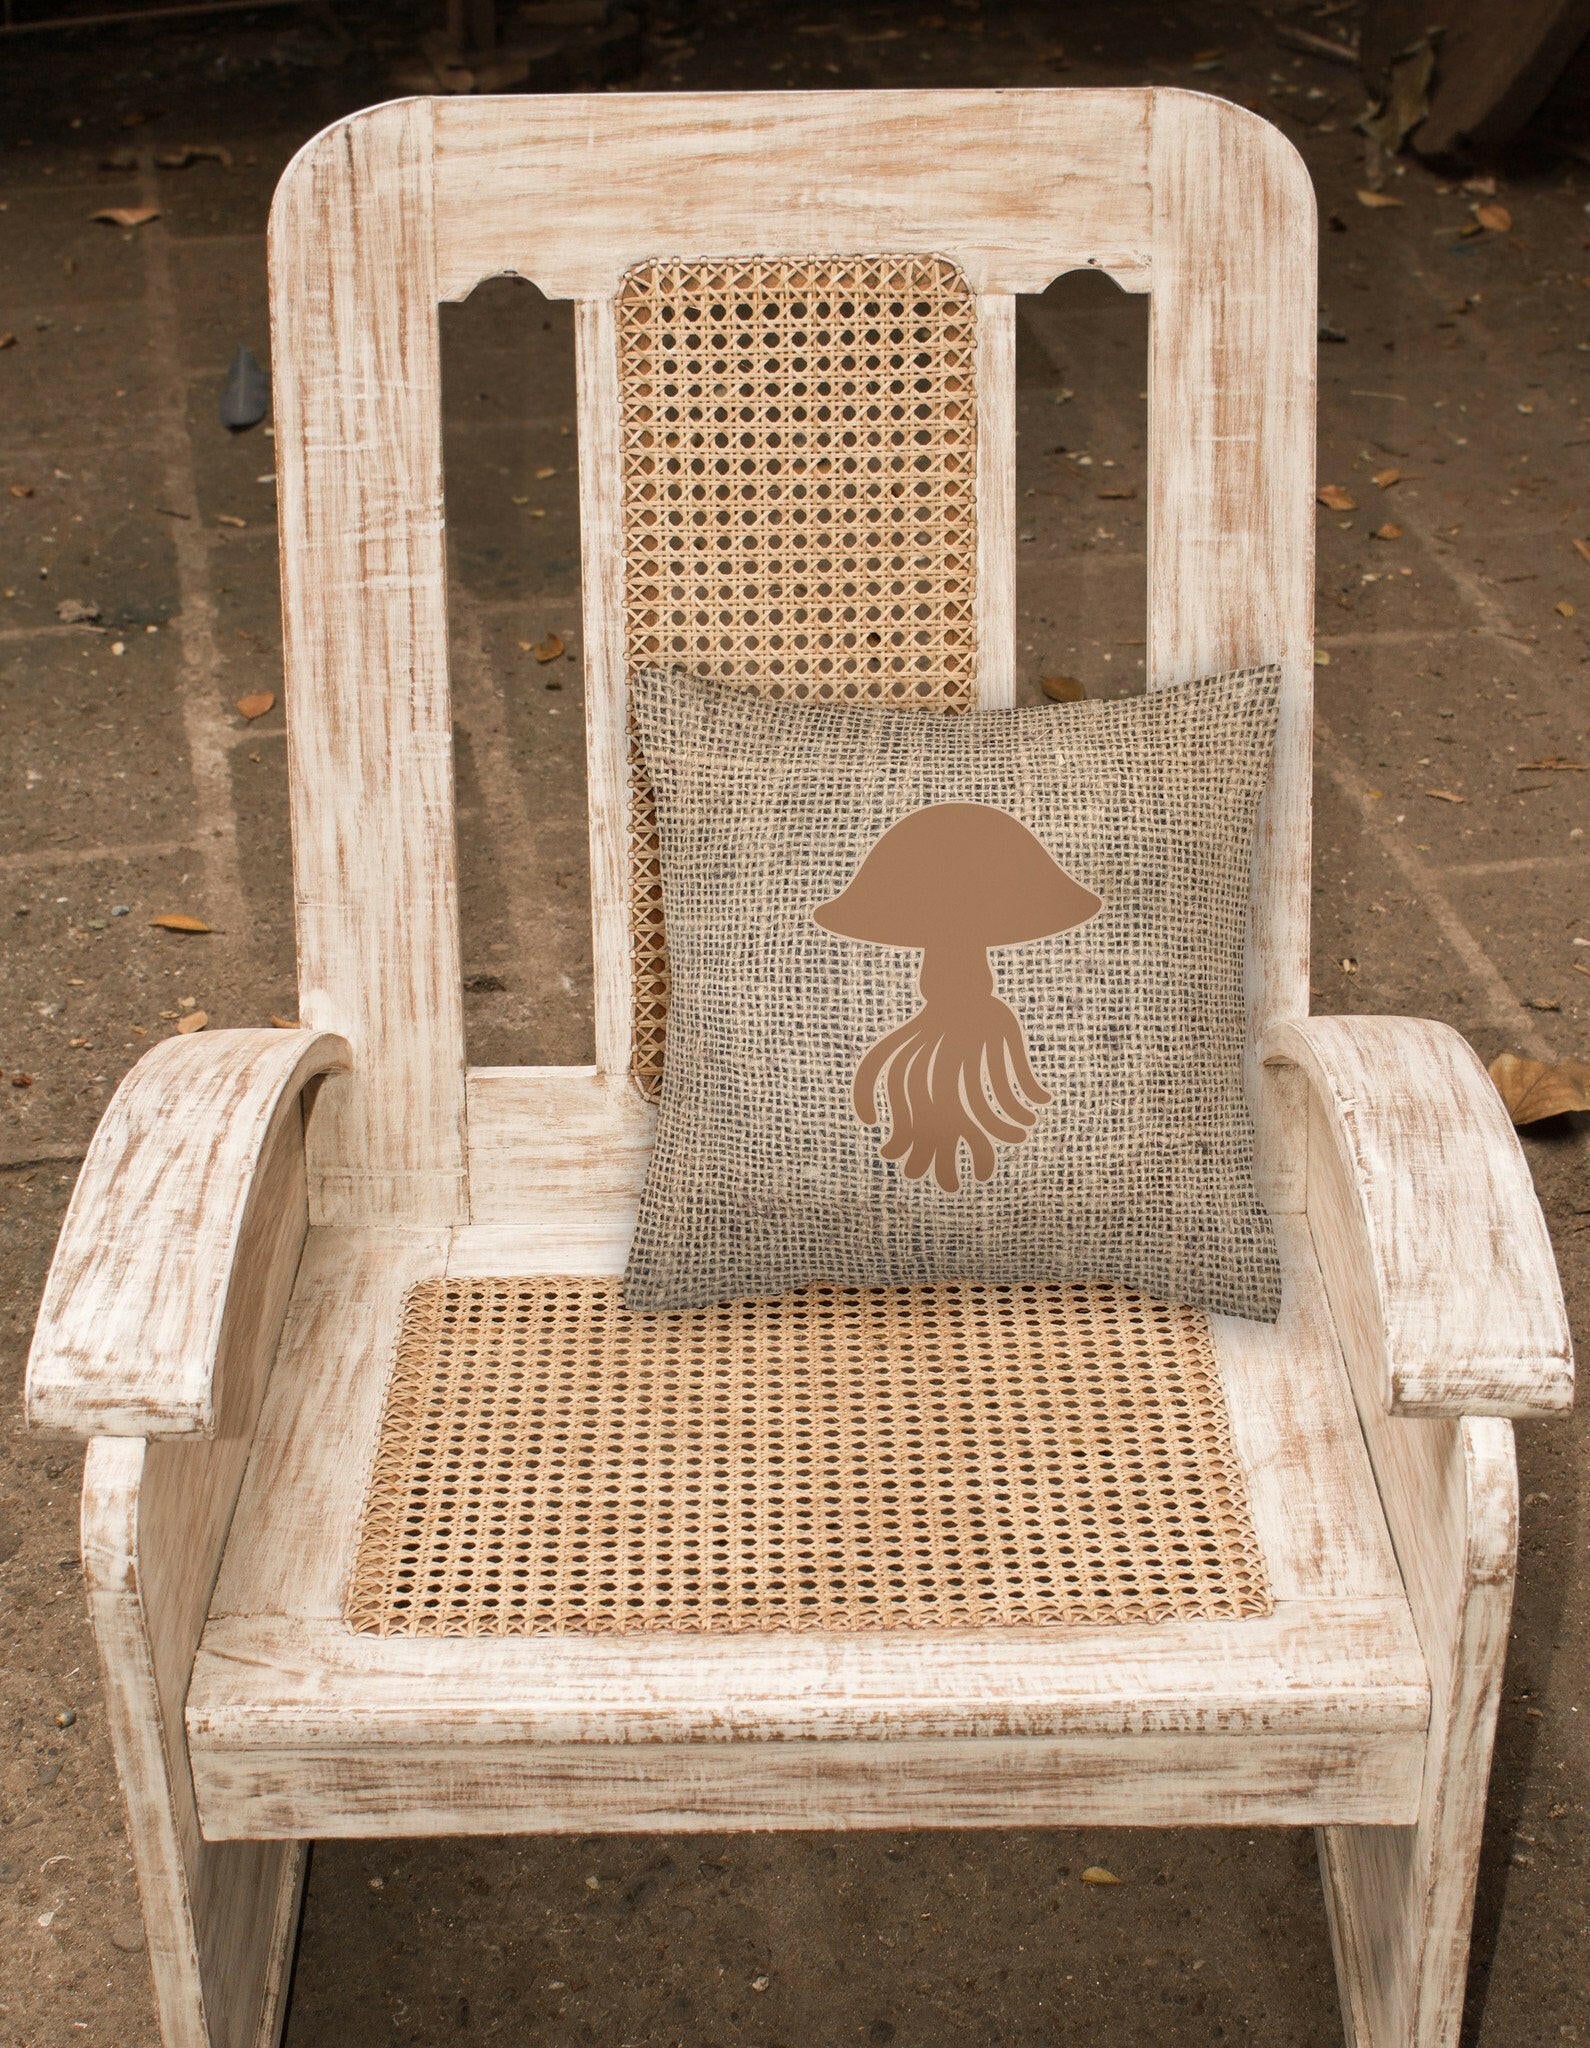 Jellyfish Burlap and Brown   Canvas Fabric Decorative Pillow BB1089 - the-store.com